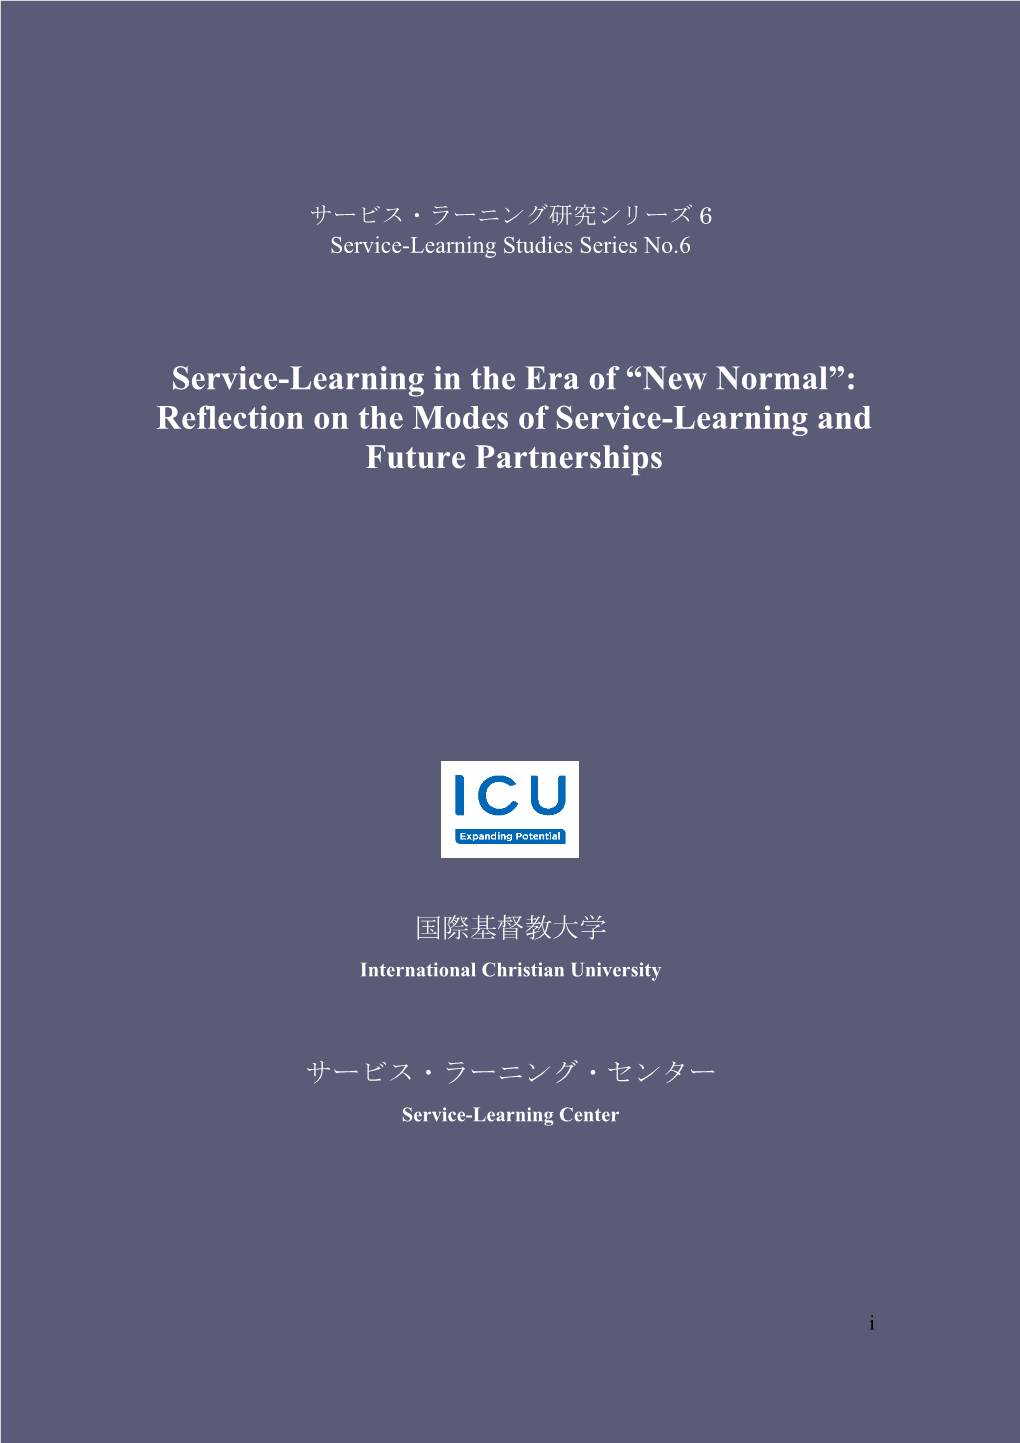 Service-Learning in the Era of “New Normal”: Reflection on the Modes of Service-Learning and Future Partnerships